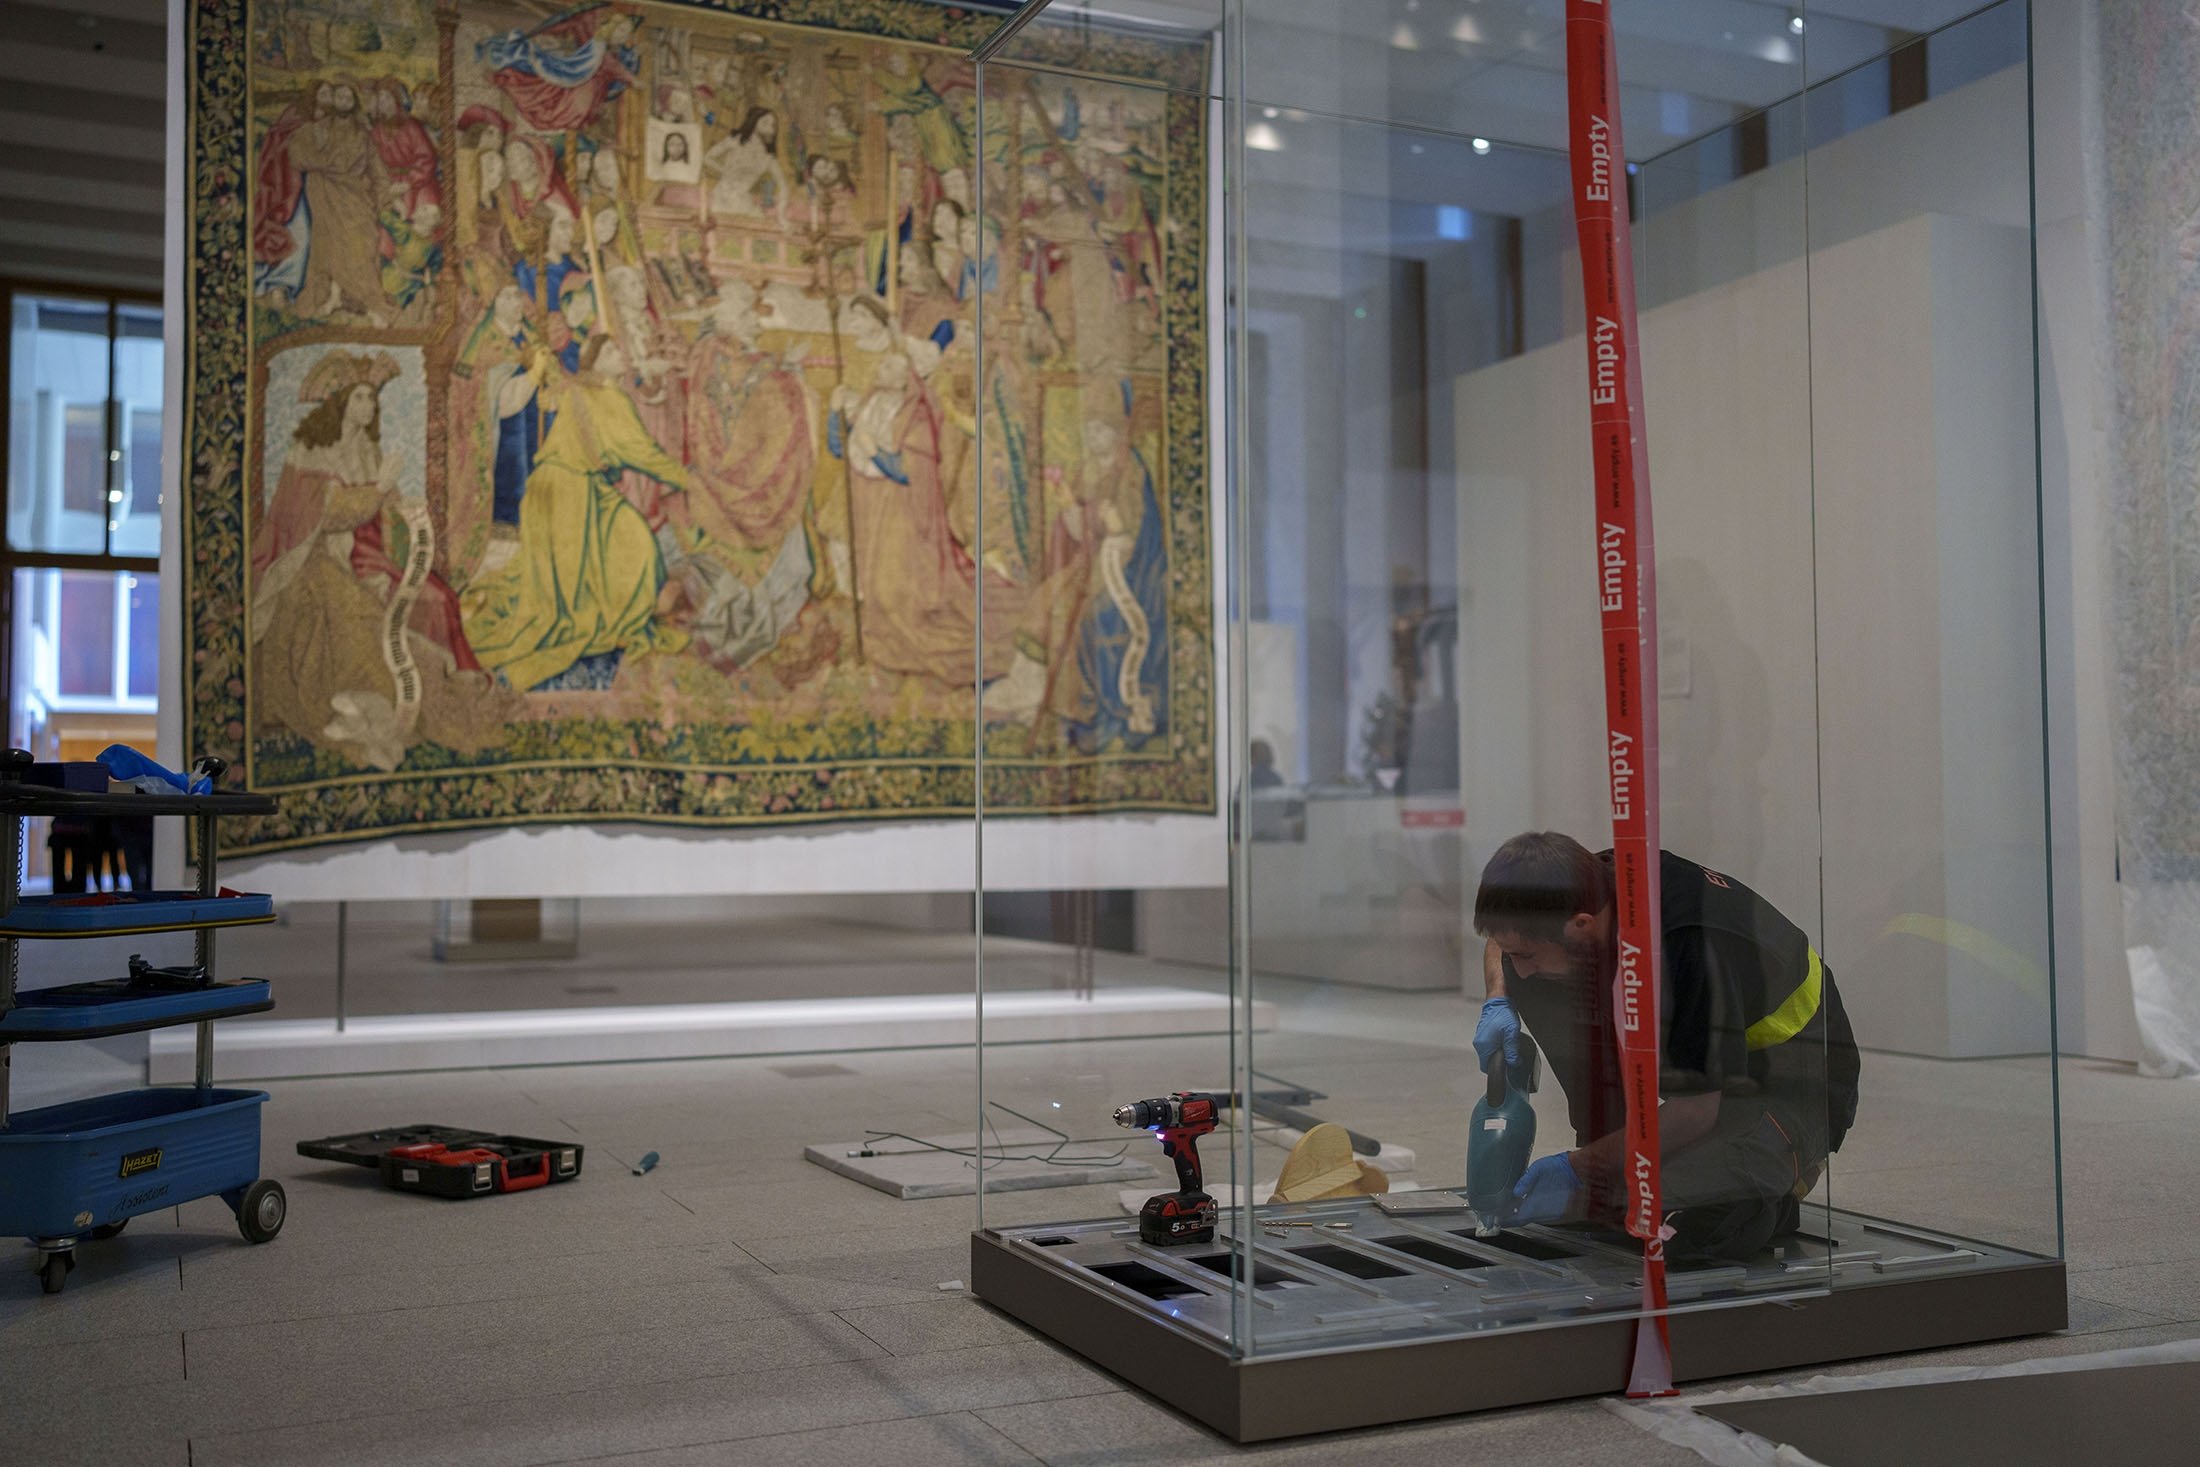 A staff member of the museum sets up an installation at the Royal Collections Gallery in Madrid, Spain, May. 19, 2023. (AP Photo)